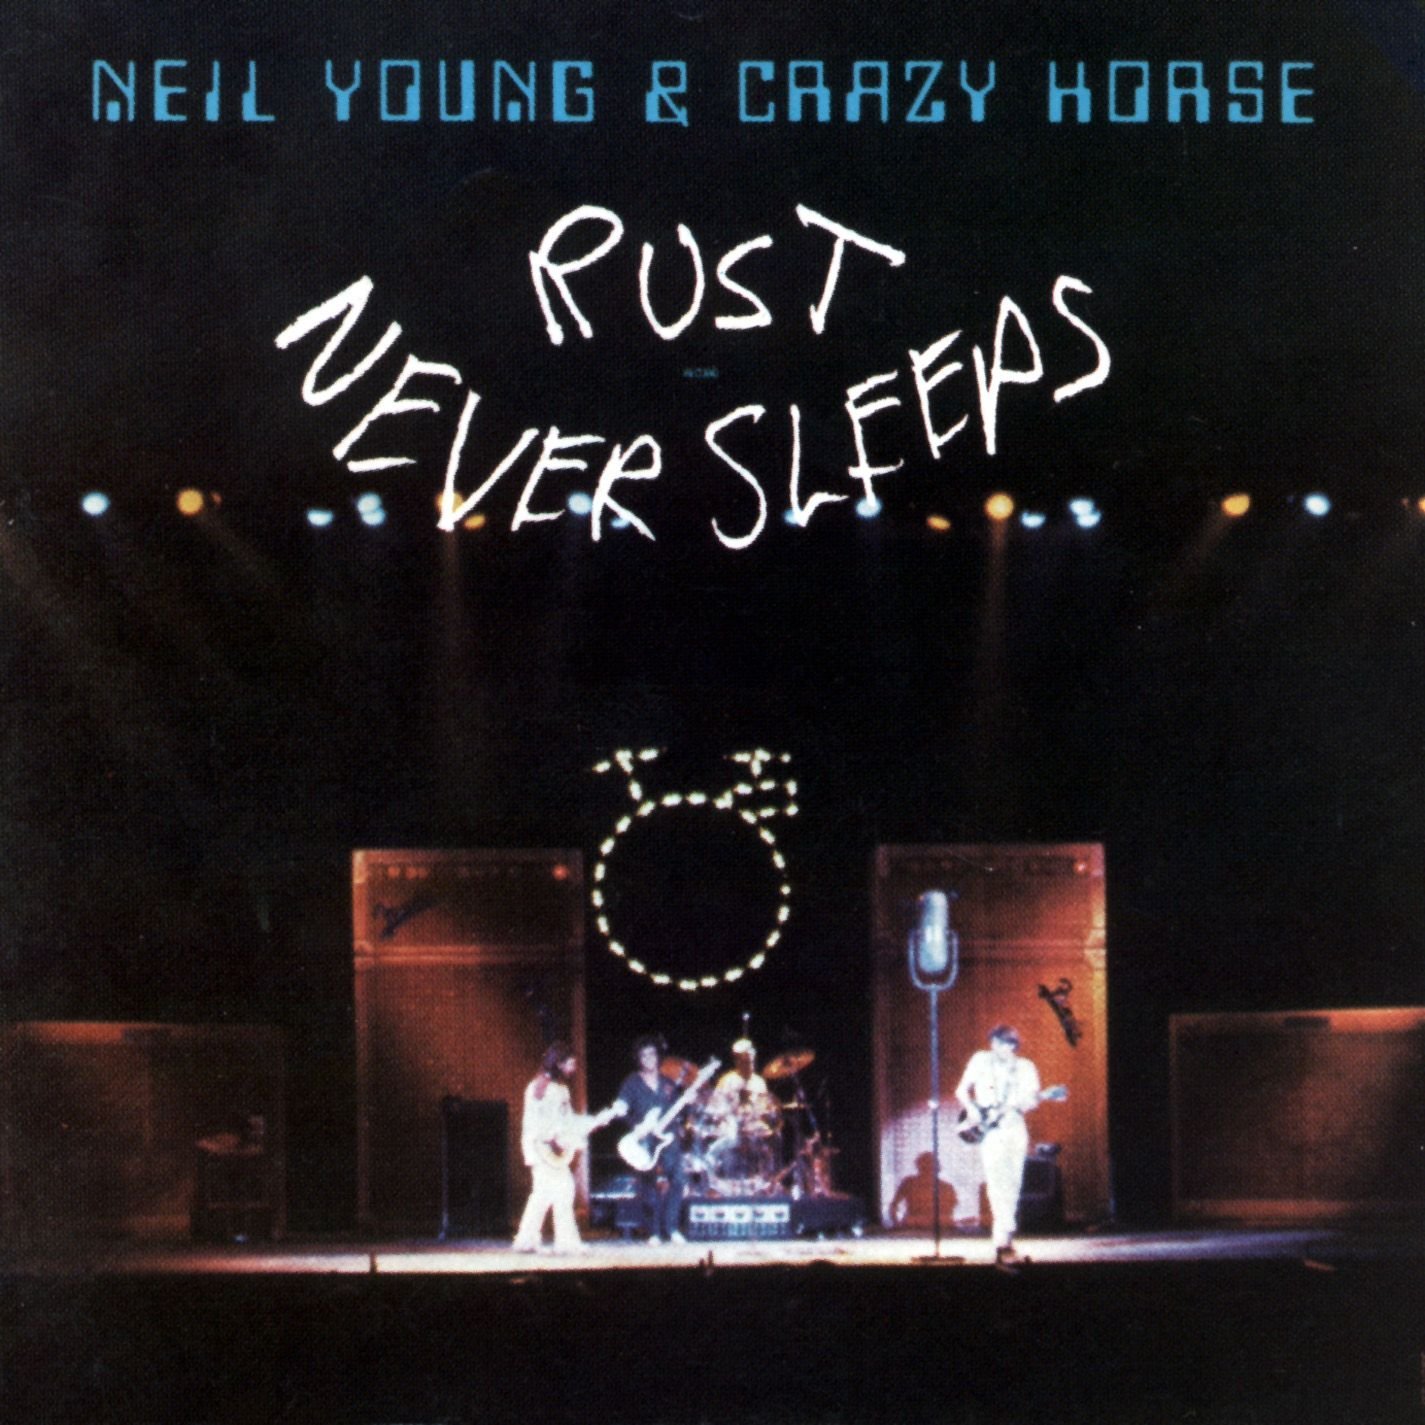 Neil Young & Crazy Horse - Rust never sleeps